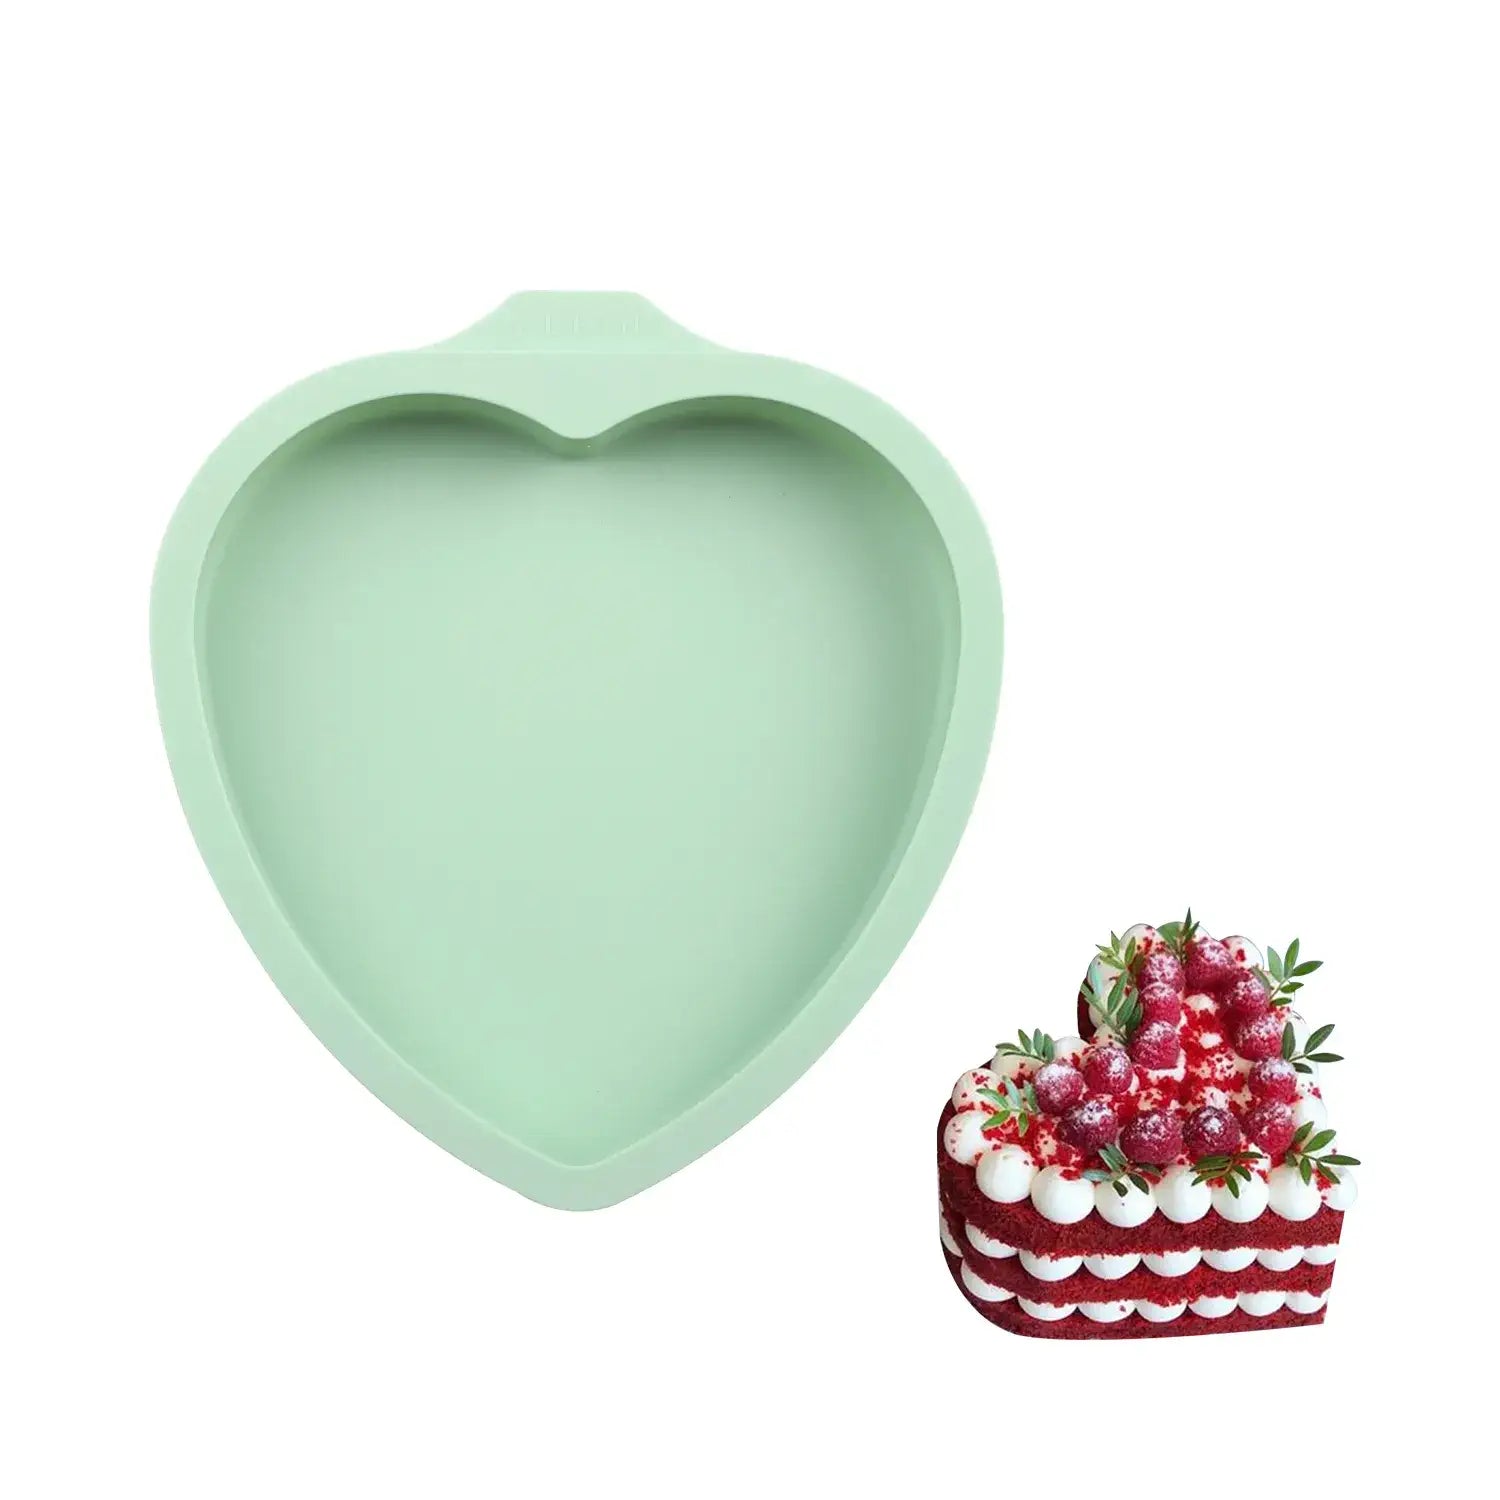 Silicone Heart Shaped Cake Pan